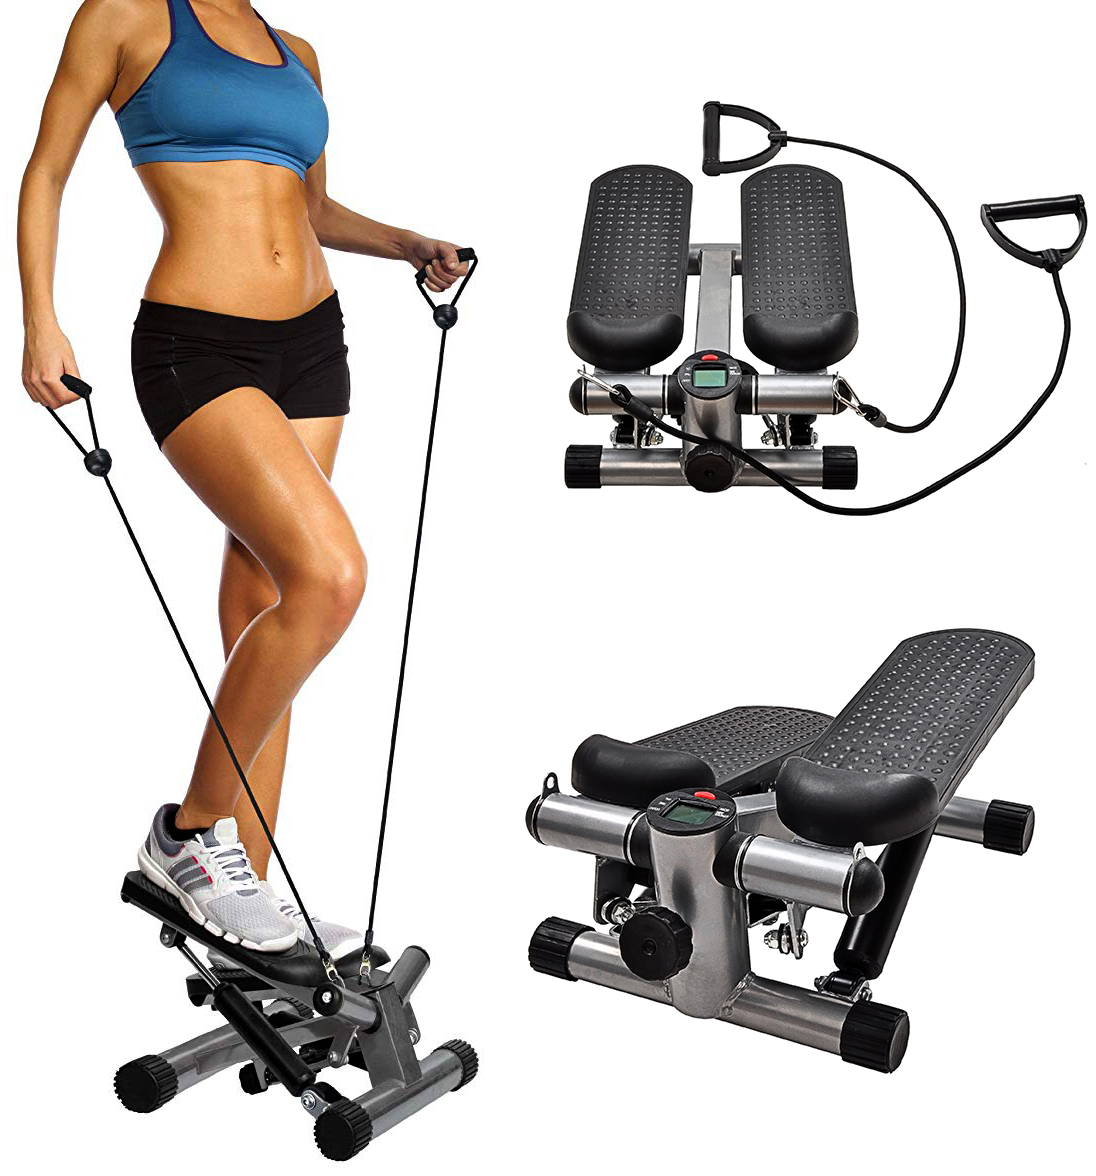 BalanceFrom Adjustable Mini Stepper with LCD Monitor Stepping Machine, Comes with Resistance Bands - image 1 of 7